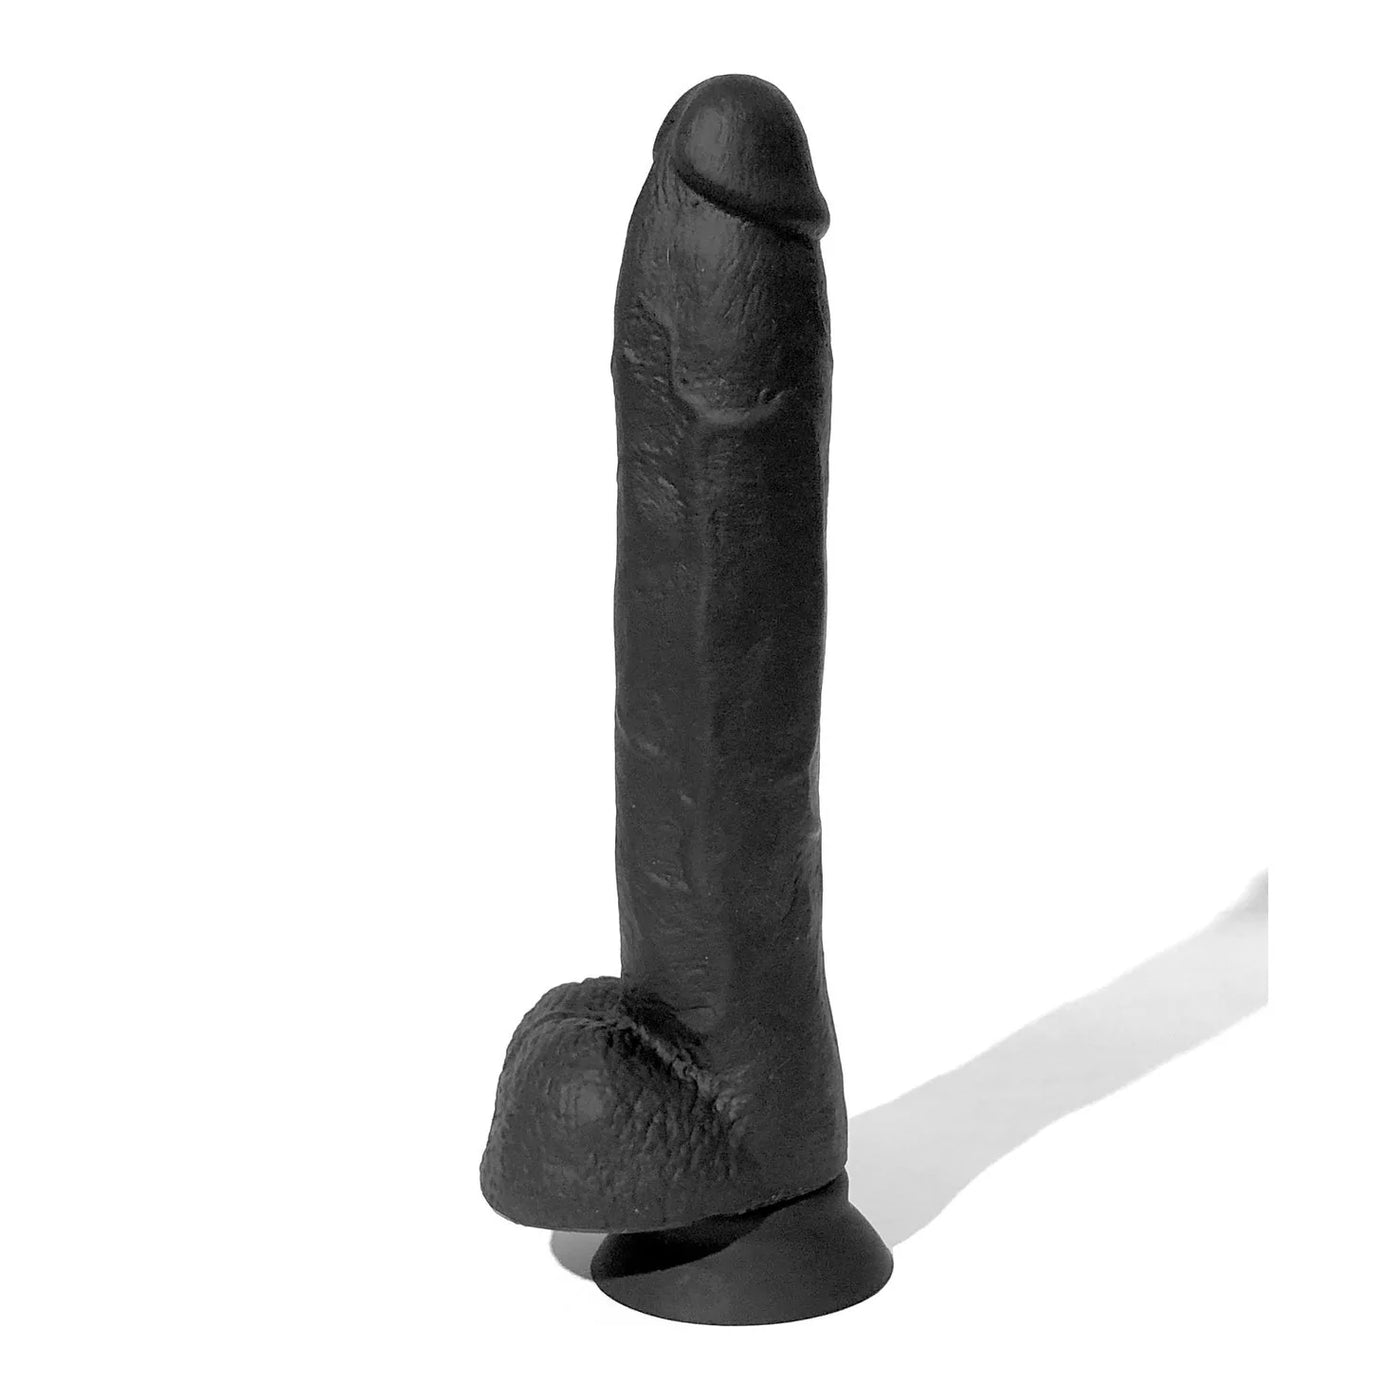 Boneyard Cock 10 Inch Silicone Dildo Tool Kit with Suction Cup and Handle - Hamilton Park Electronics